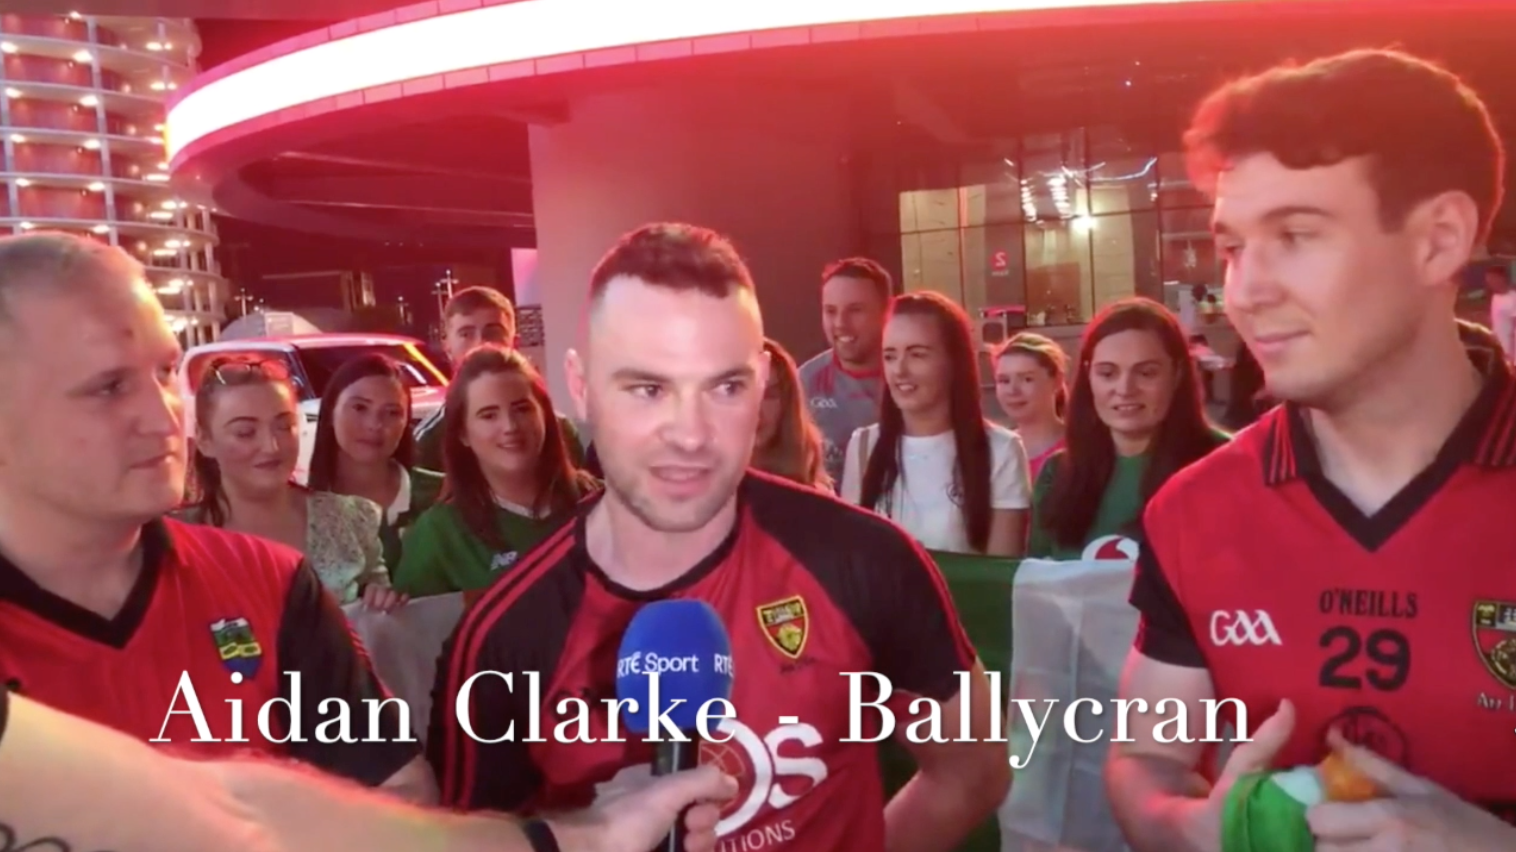 Ballycran’s Aidan Clarke Shares His Thoughts On Living Abroad